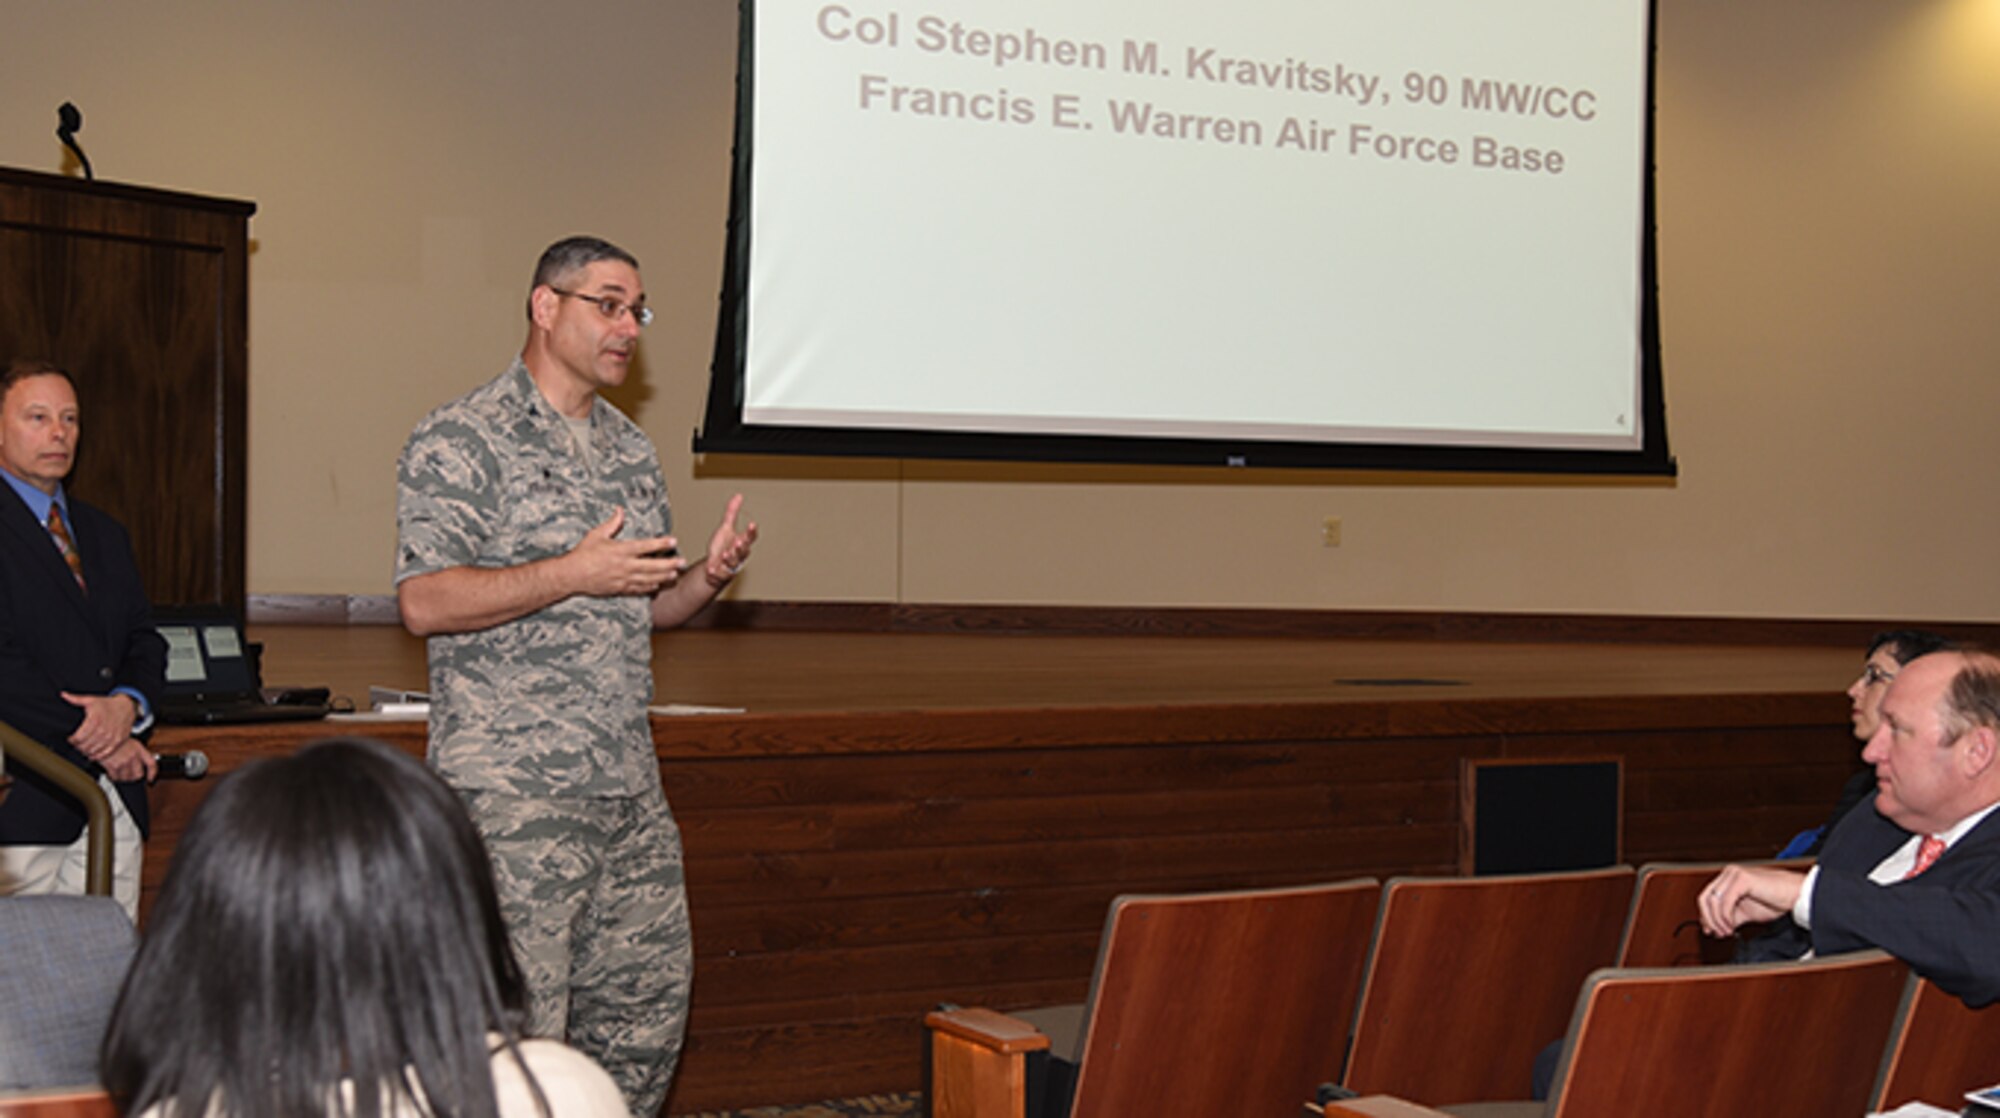 Col. Stephen Kravitsky, 90th Missile Wing commander, discusses the history and intention for the Enhanced Use Lease at the Industry Day on April 18, 2017, at the Joint Forces Readiness Center in Cheyenne, Wyo. 74 acres on the south border of the base are being opened to public bid for development as part of the EUL. More than thirty individuals came to the event, representing more than 15 property-development organizations. (U.S. Air Force photo by Glenn S. Robertson)